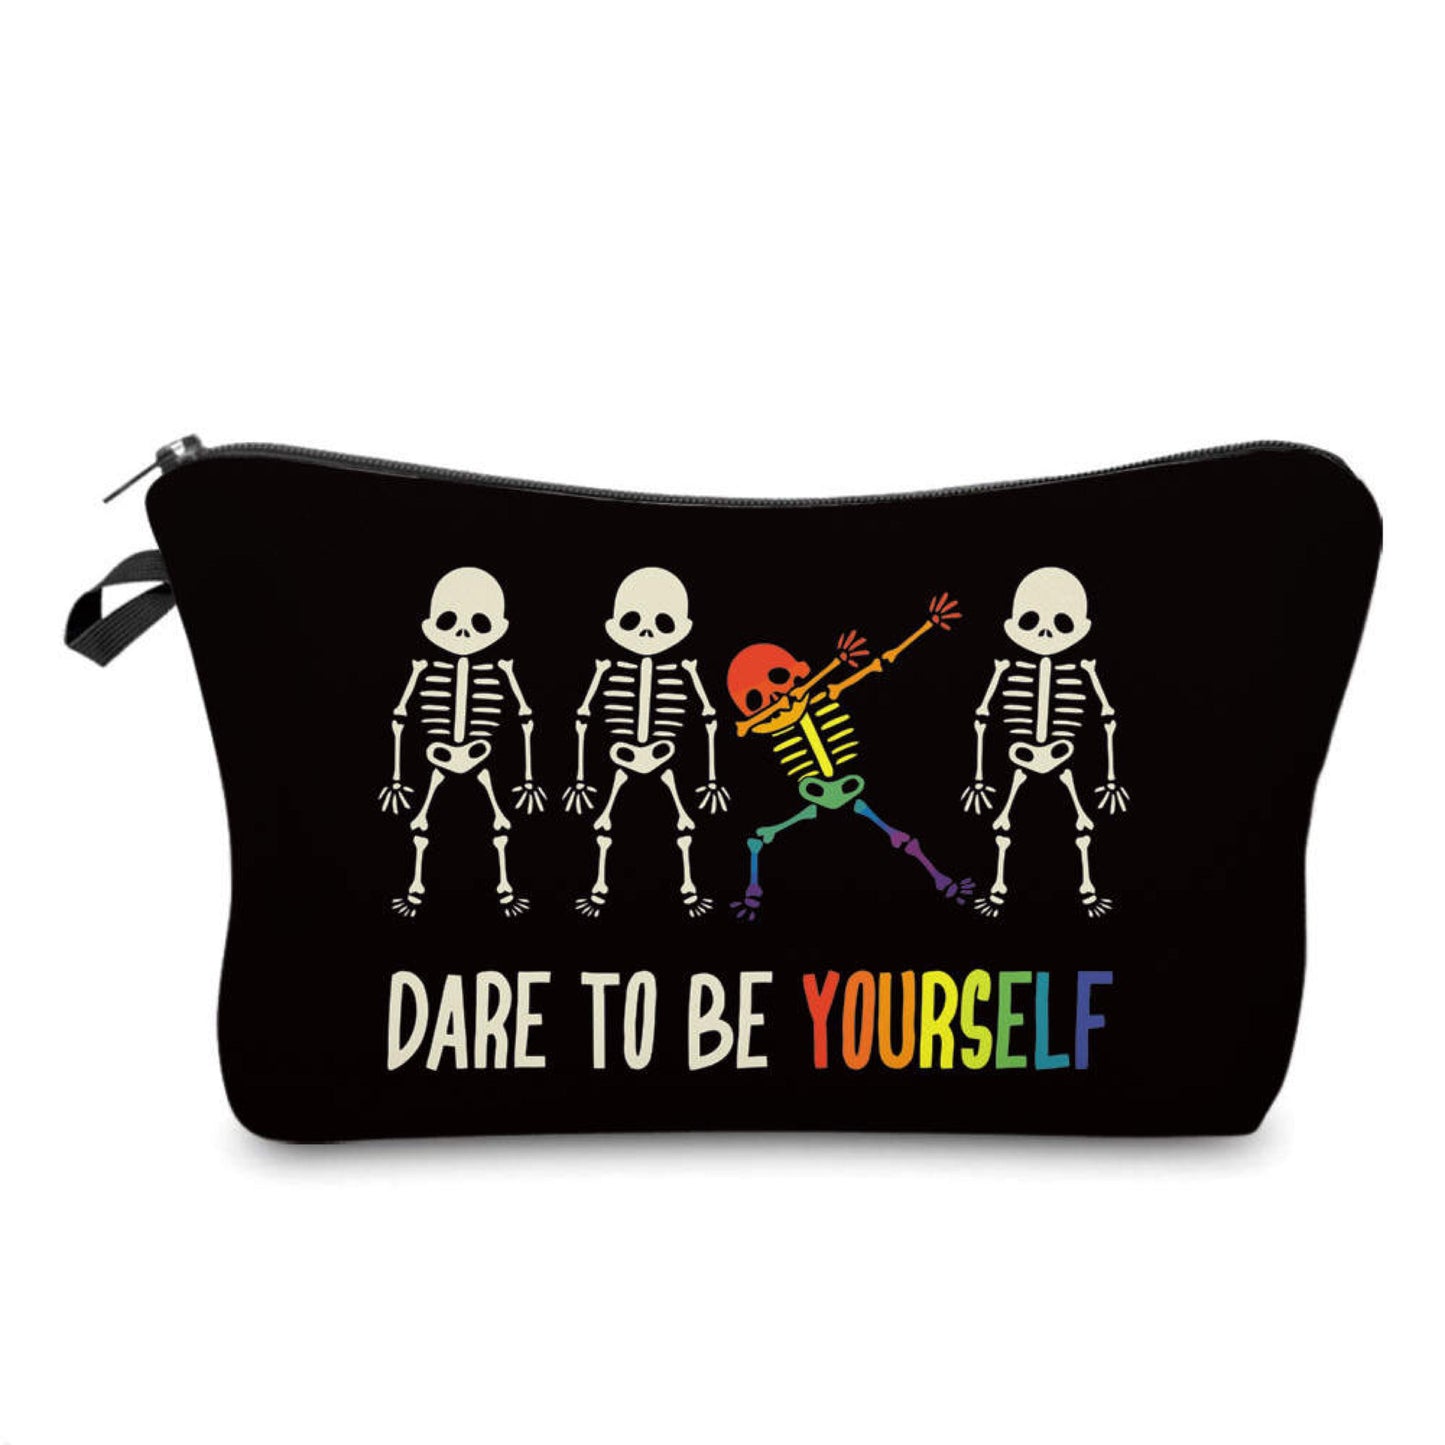 Dare To Be Yourself - Water-Resistant Multi-Use Pouch